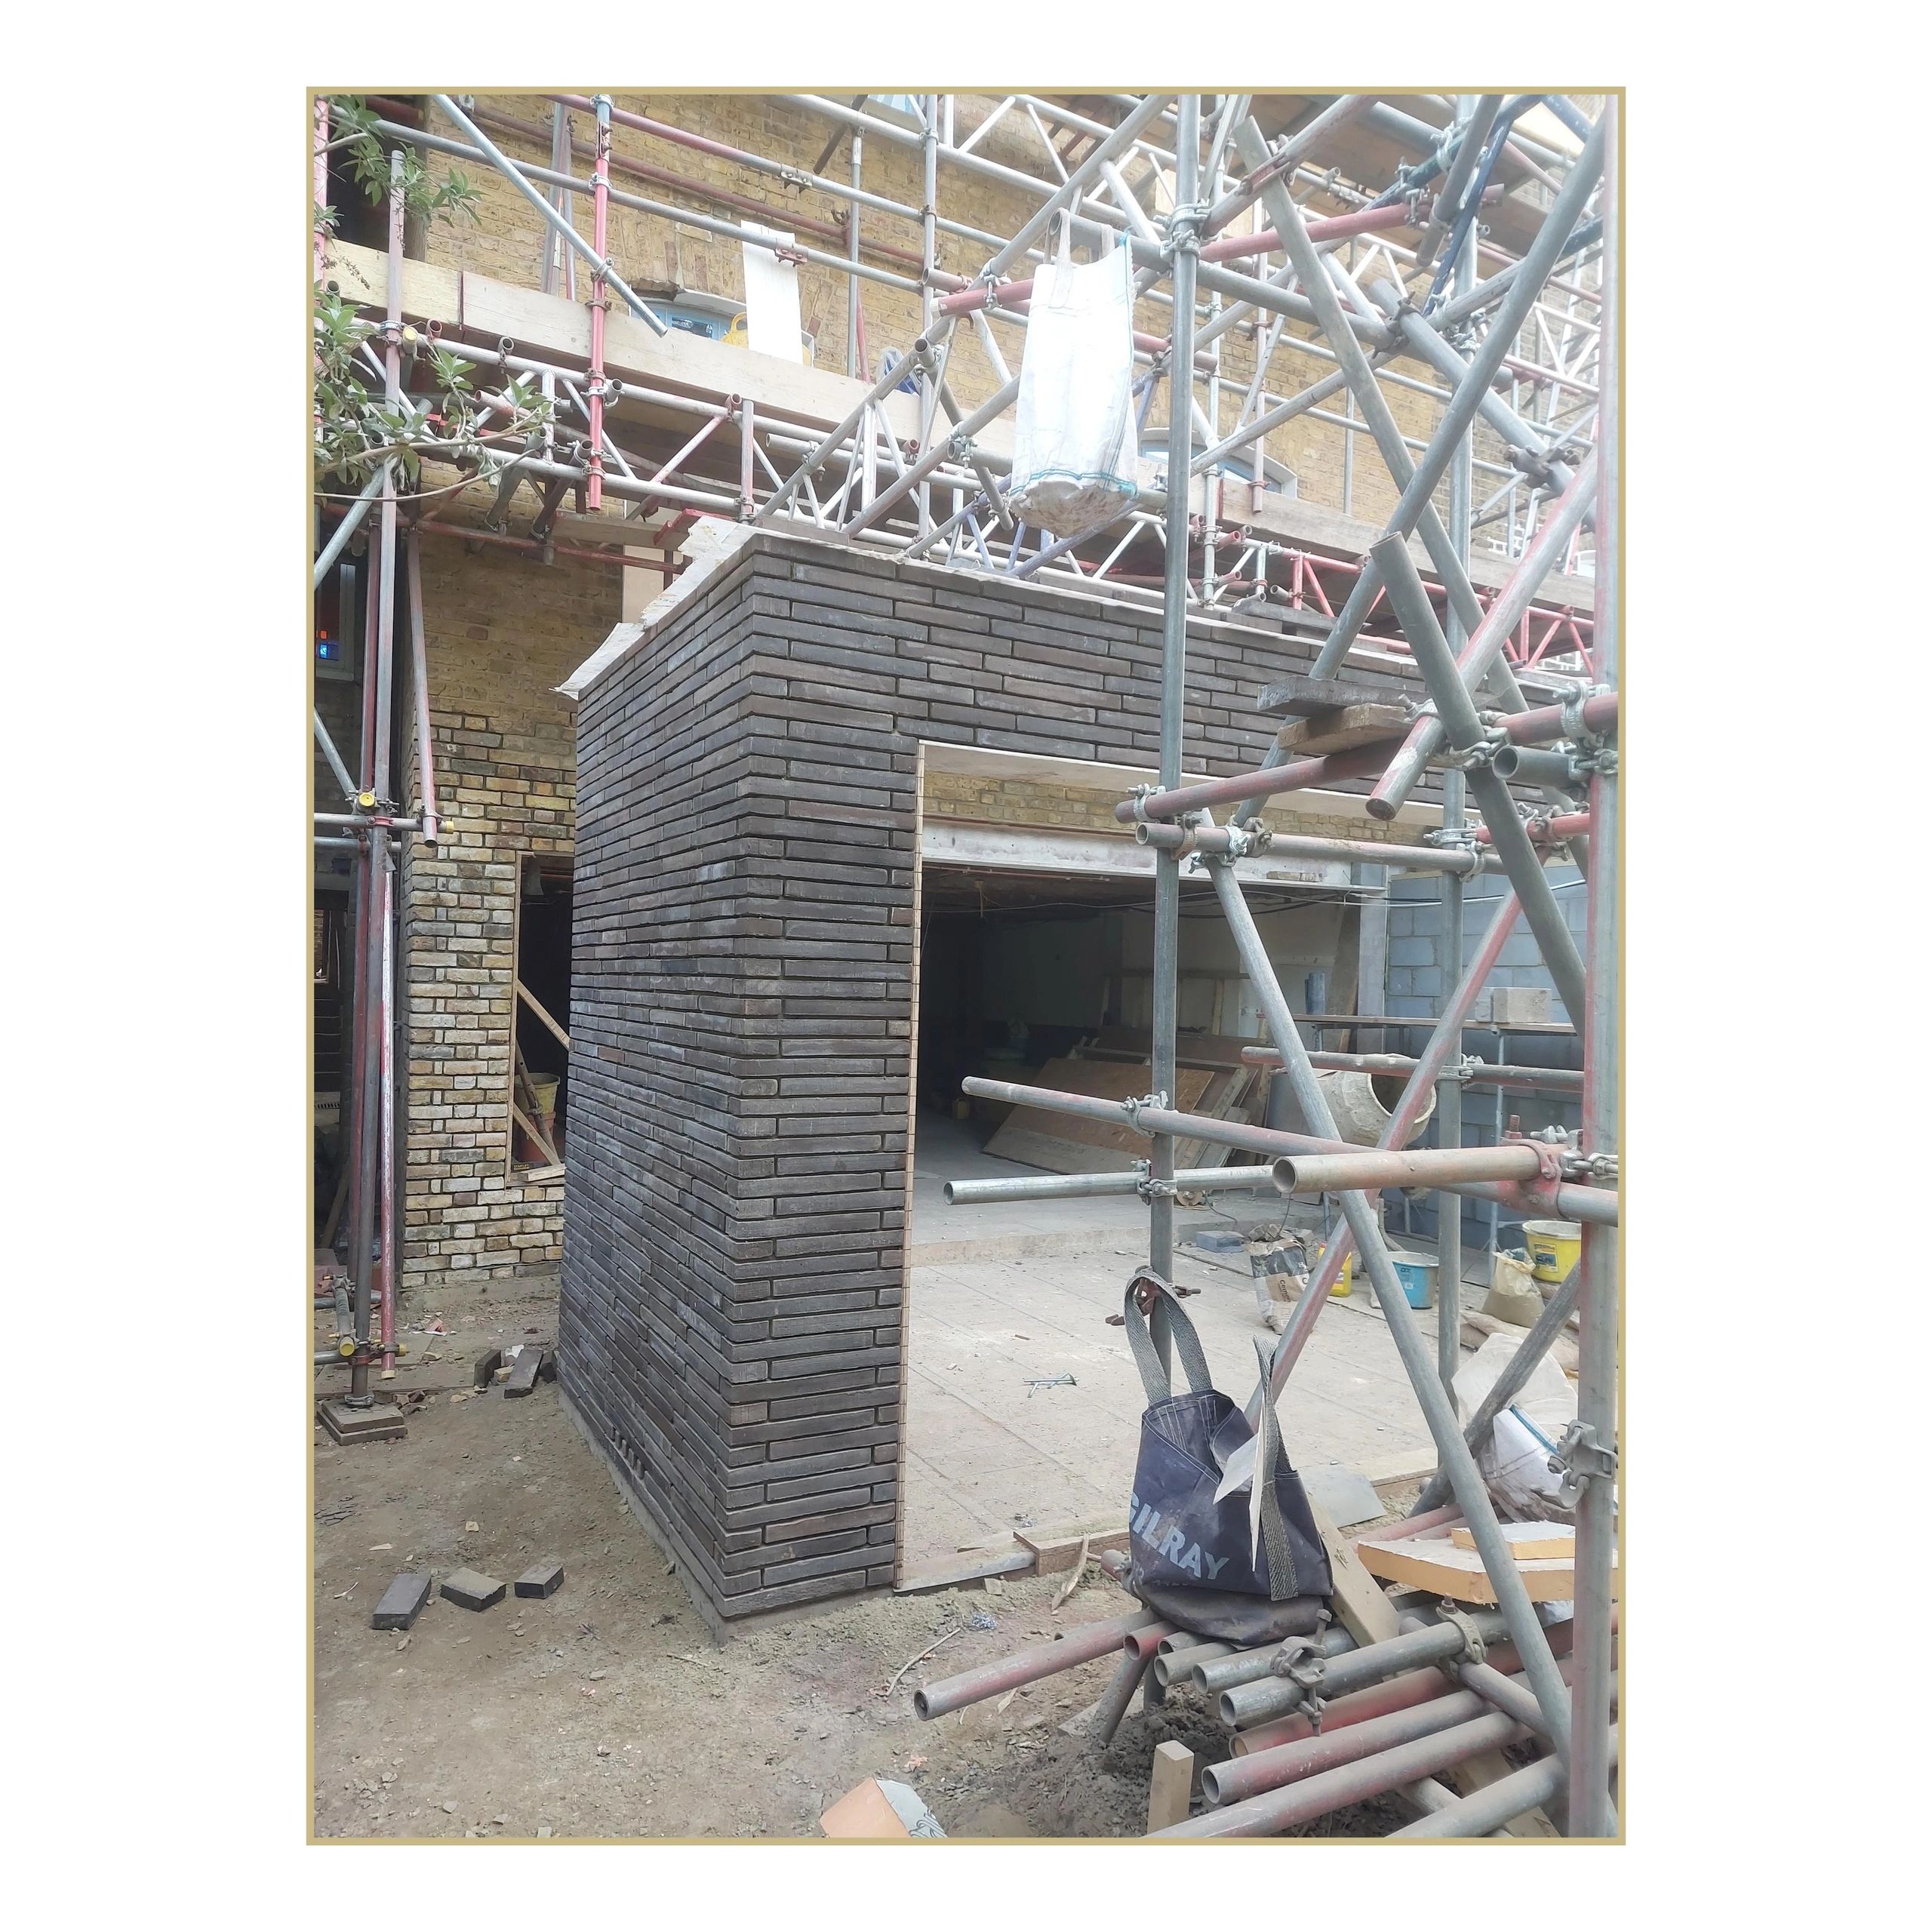 property extension improvement enlargement build add on brick work house pointing improve build